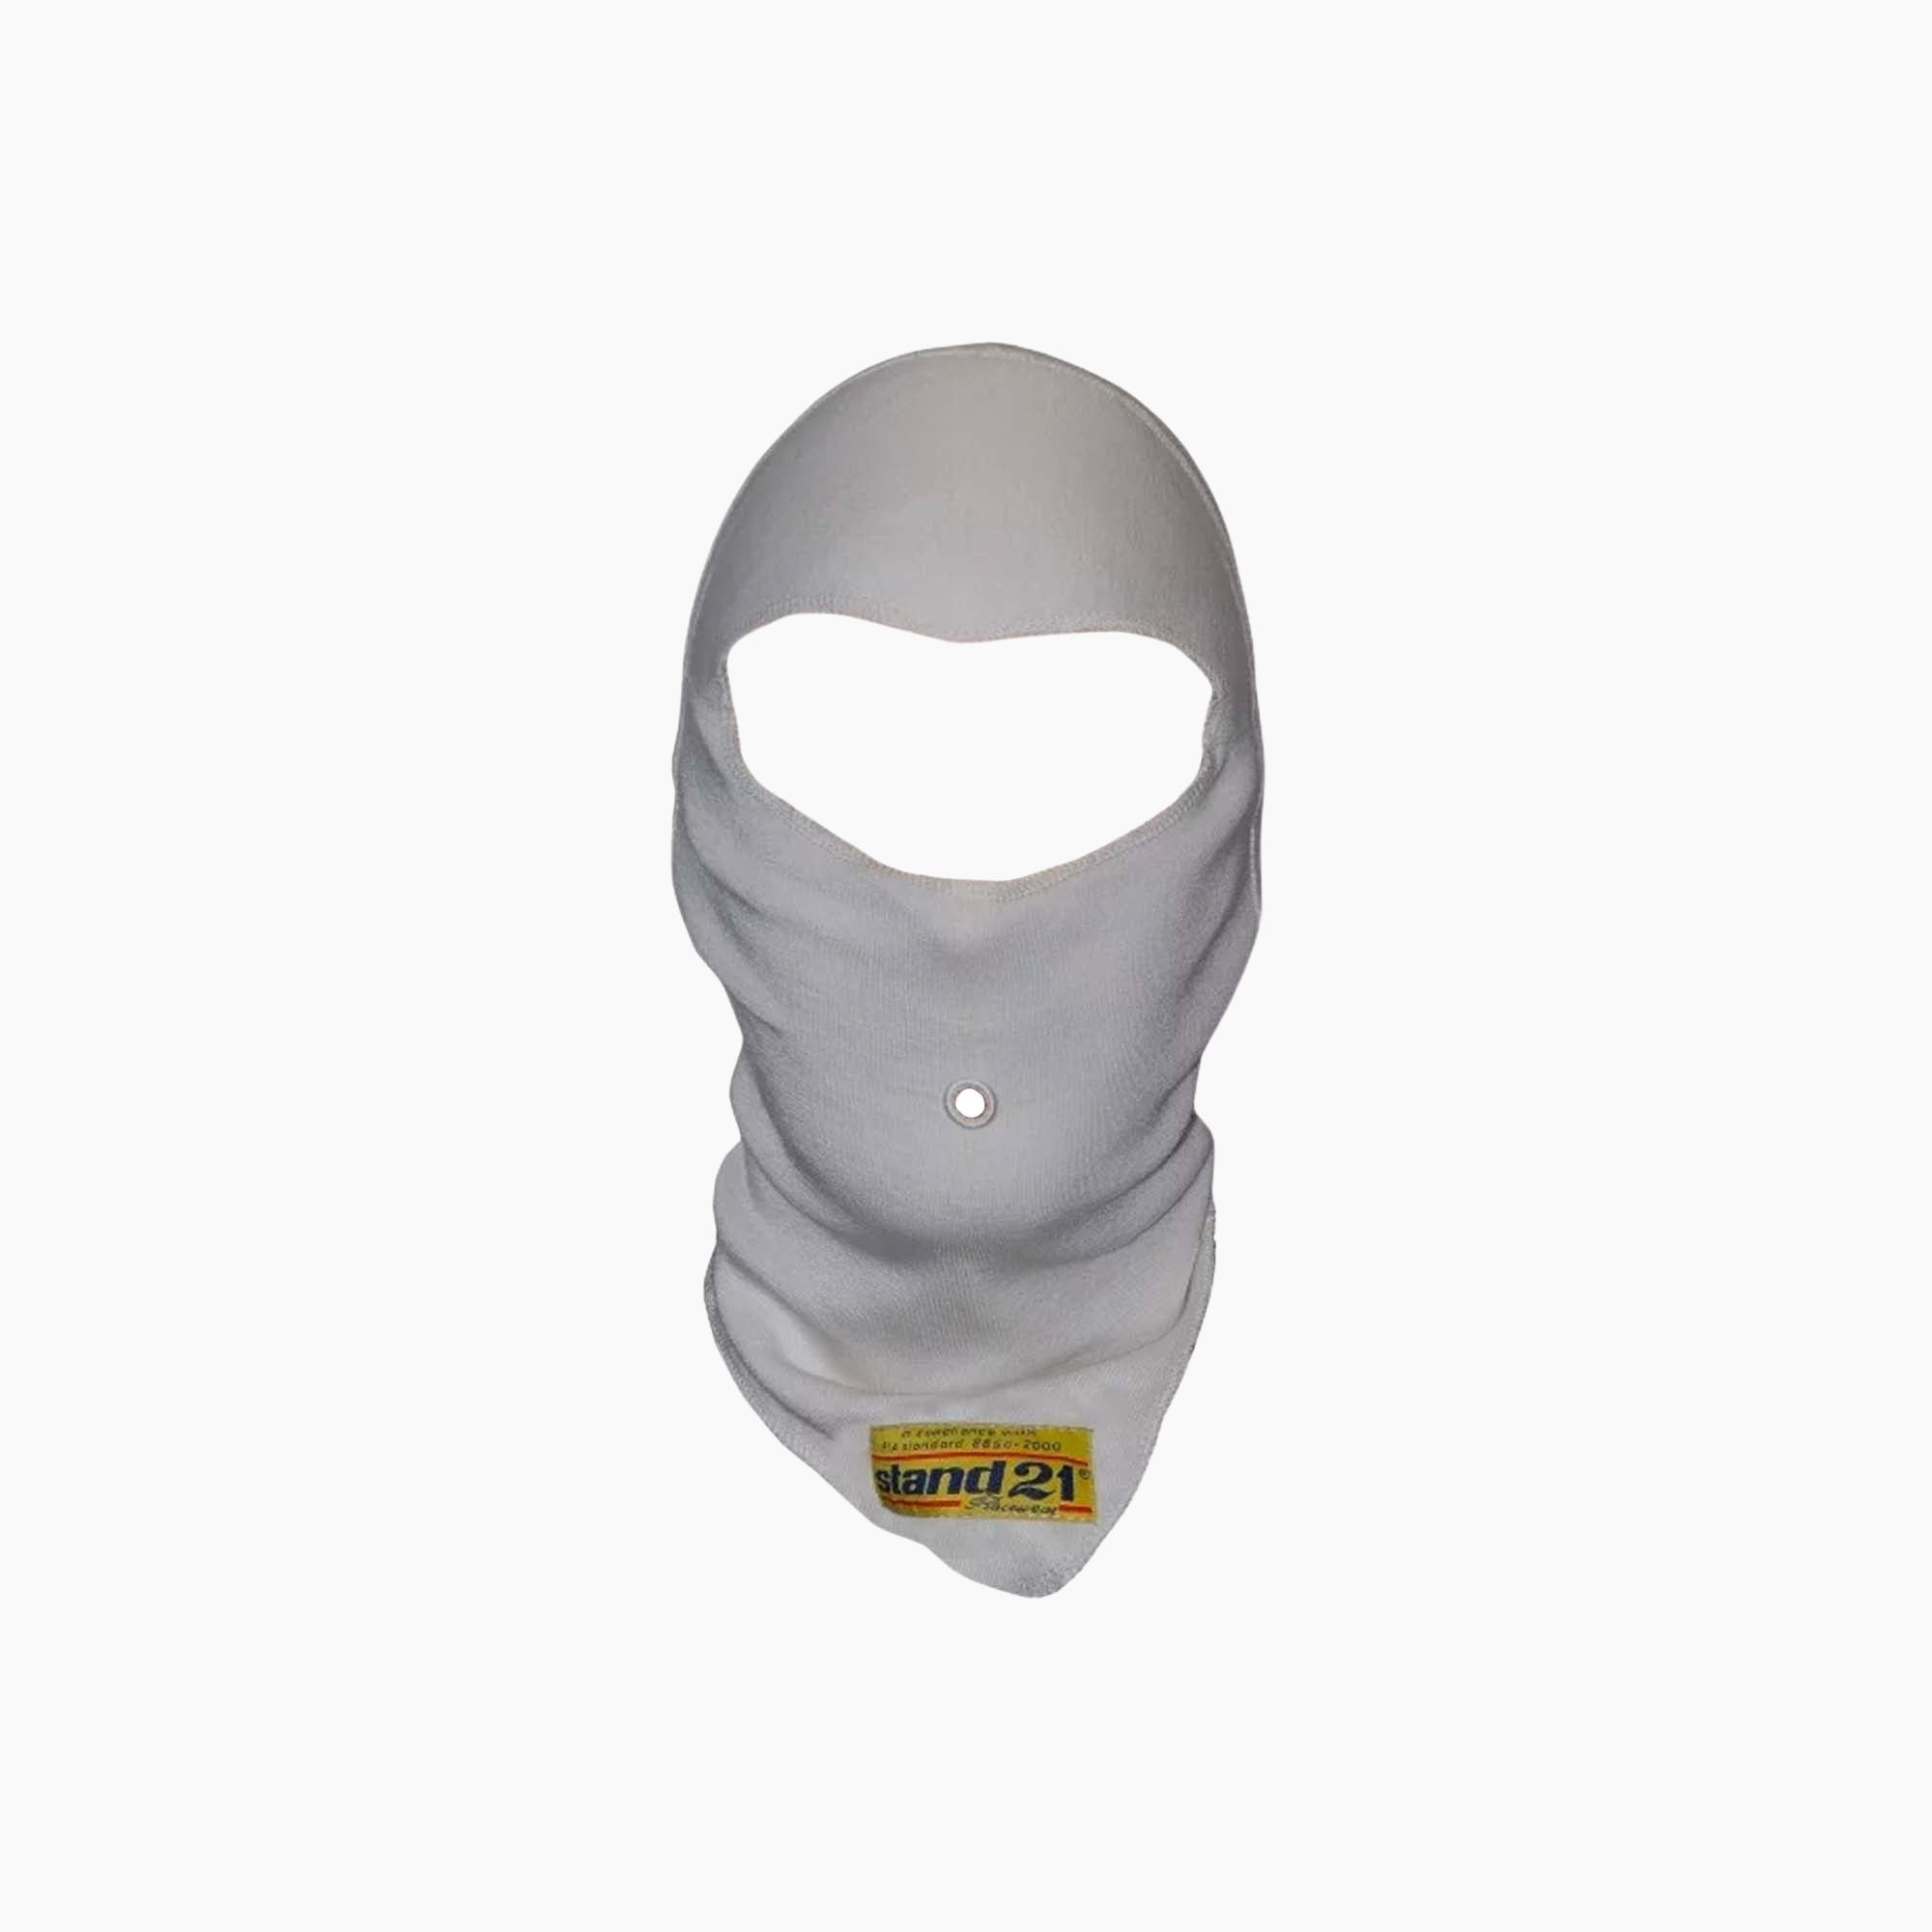 Stand 21 | Top Fit Balaclava-Racing Underwear-STAND 21-gpx-store